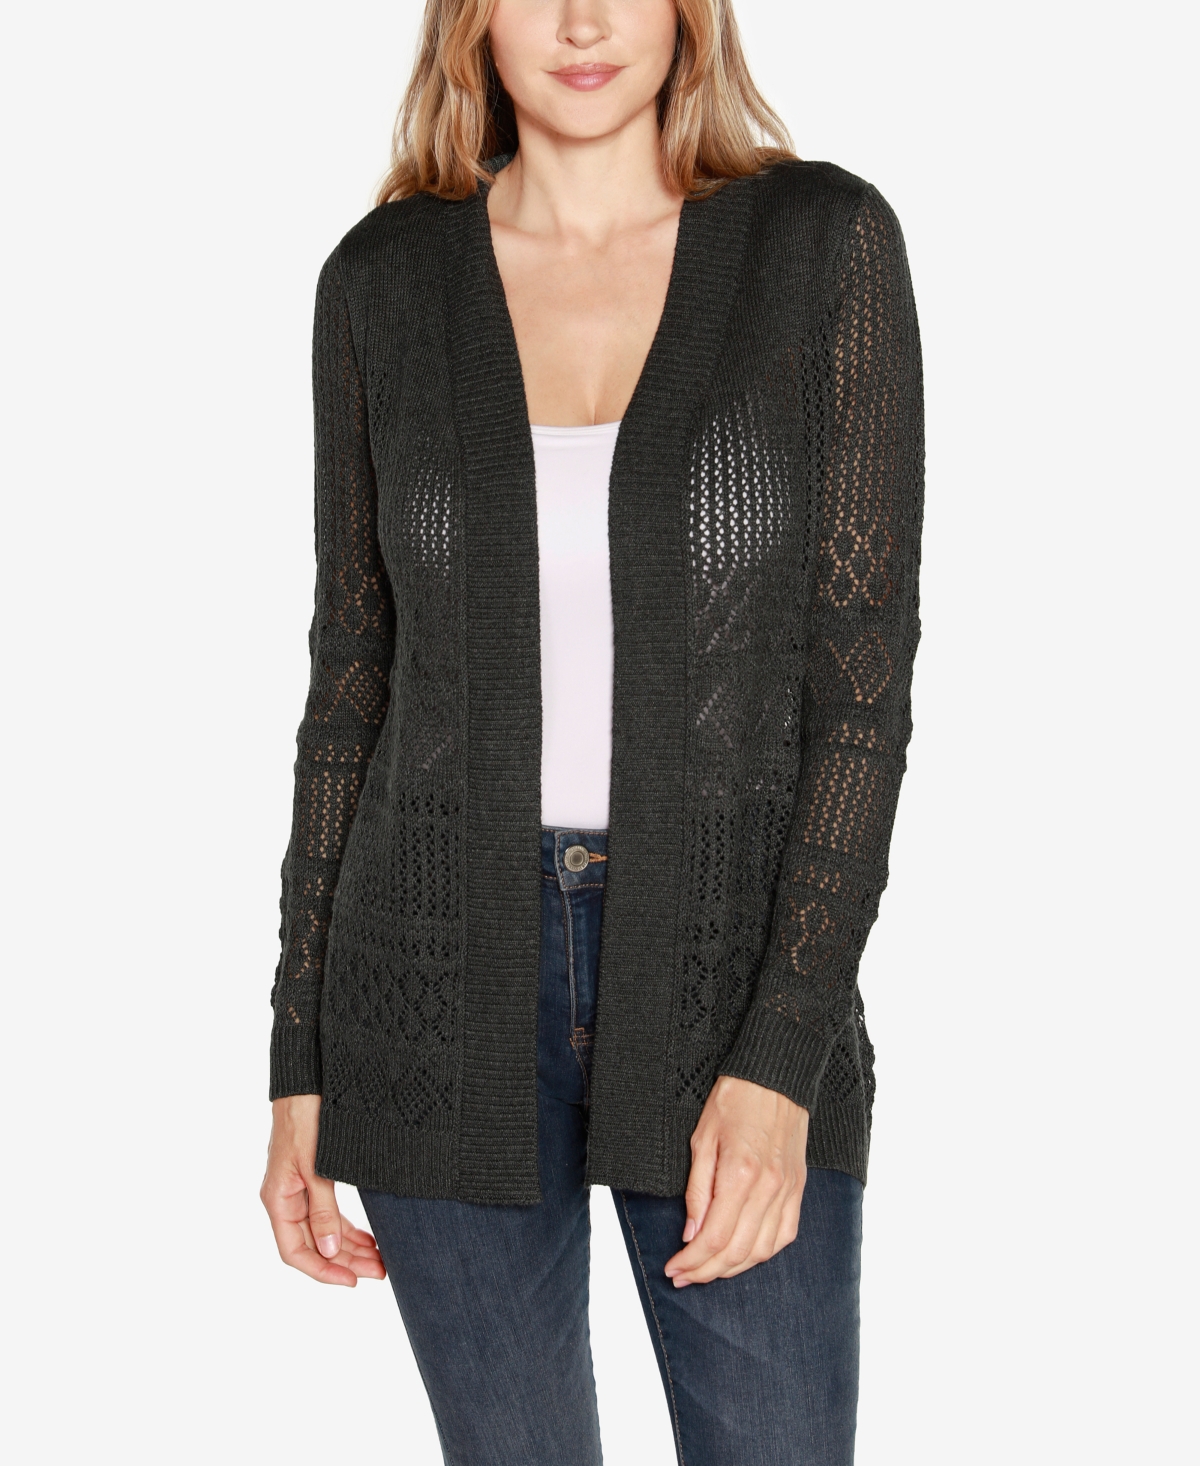 Belldini Women's Pointelle Long Sleeves Open Cardigan Sweater In Heather Charcoal